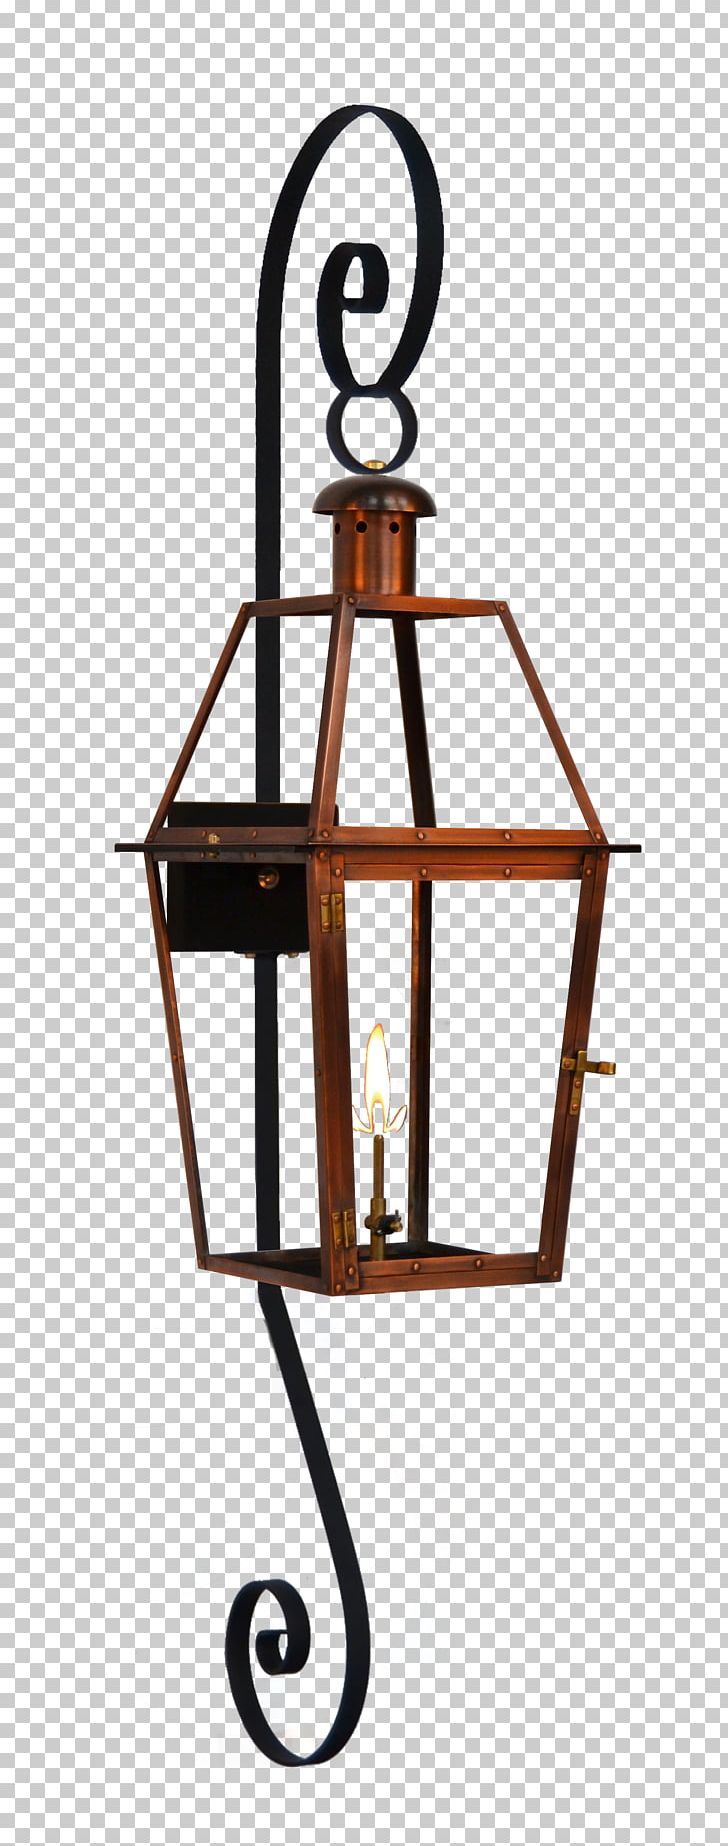 Light Fixture Lantern Gas Lighting PNG, Clipart, Candle Holder, Copper, Coppersmith, Electric, Electricity Free PNG Download